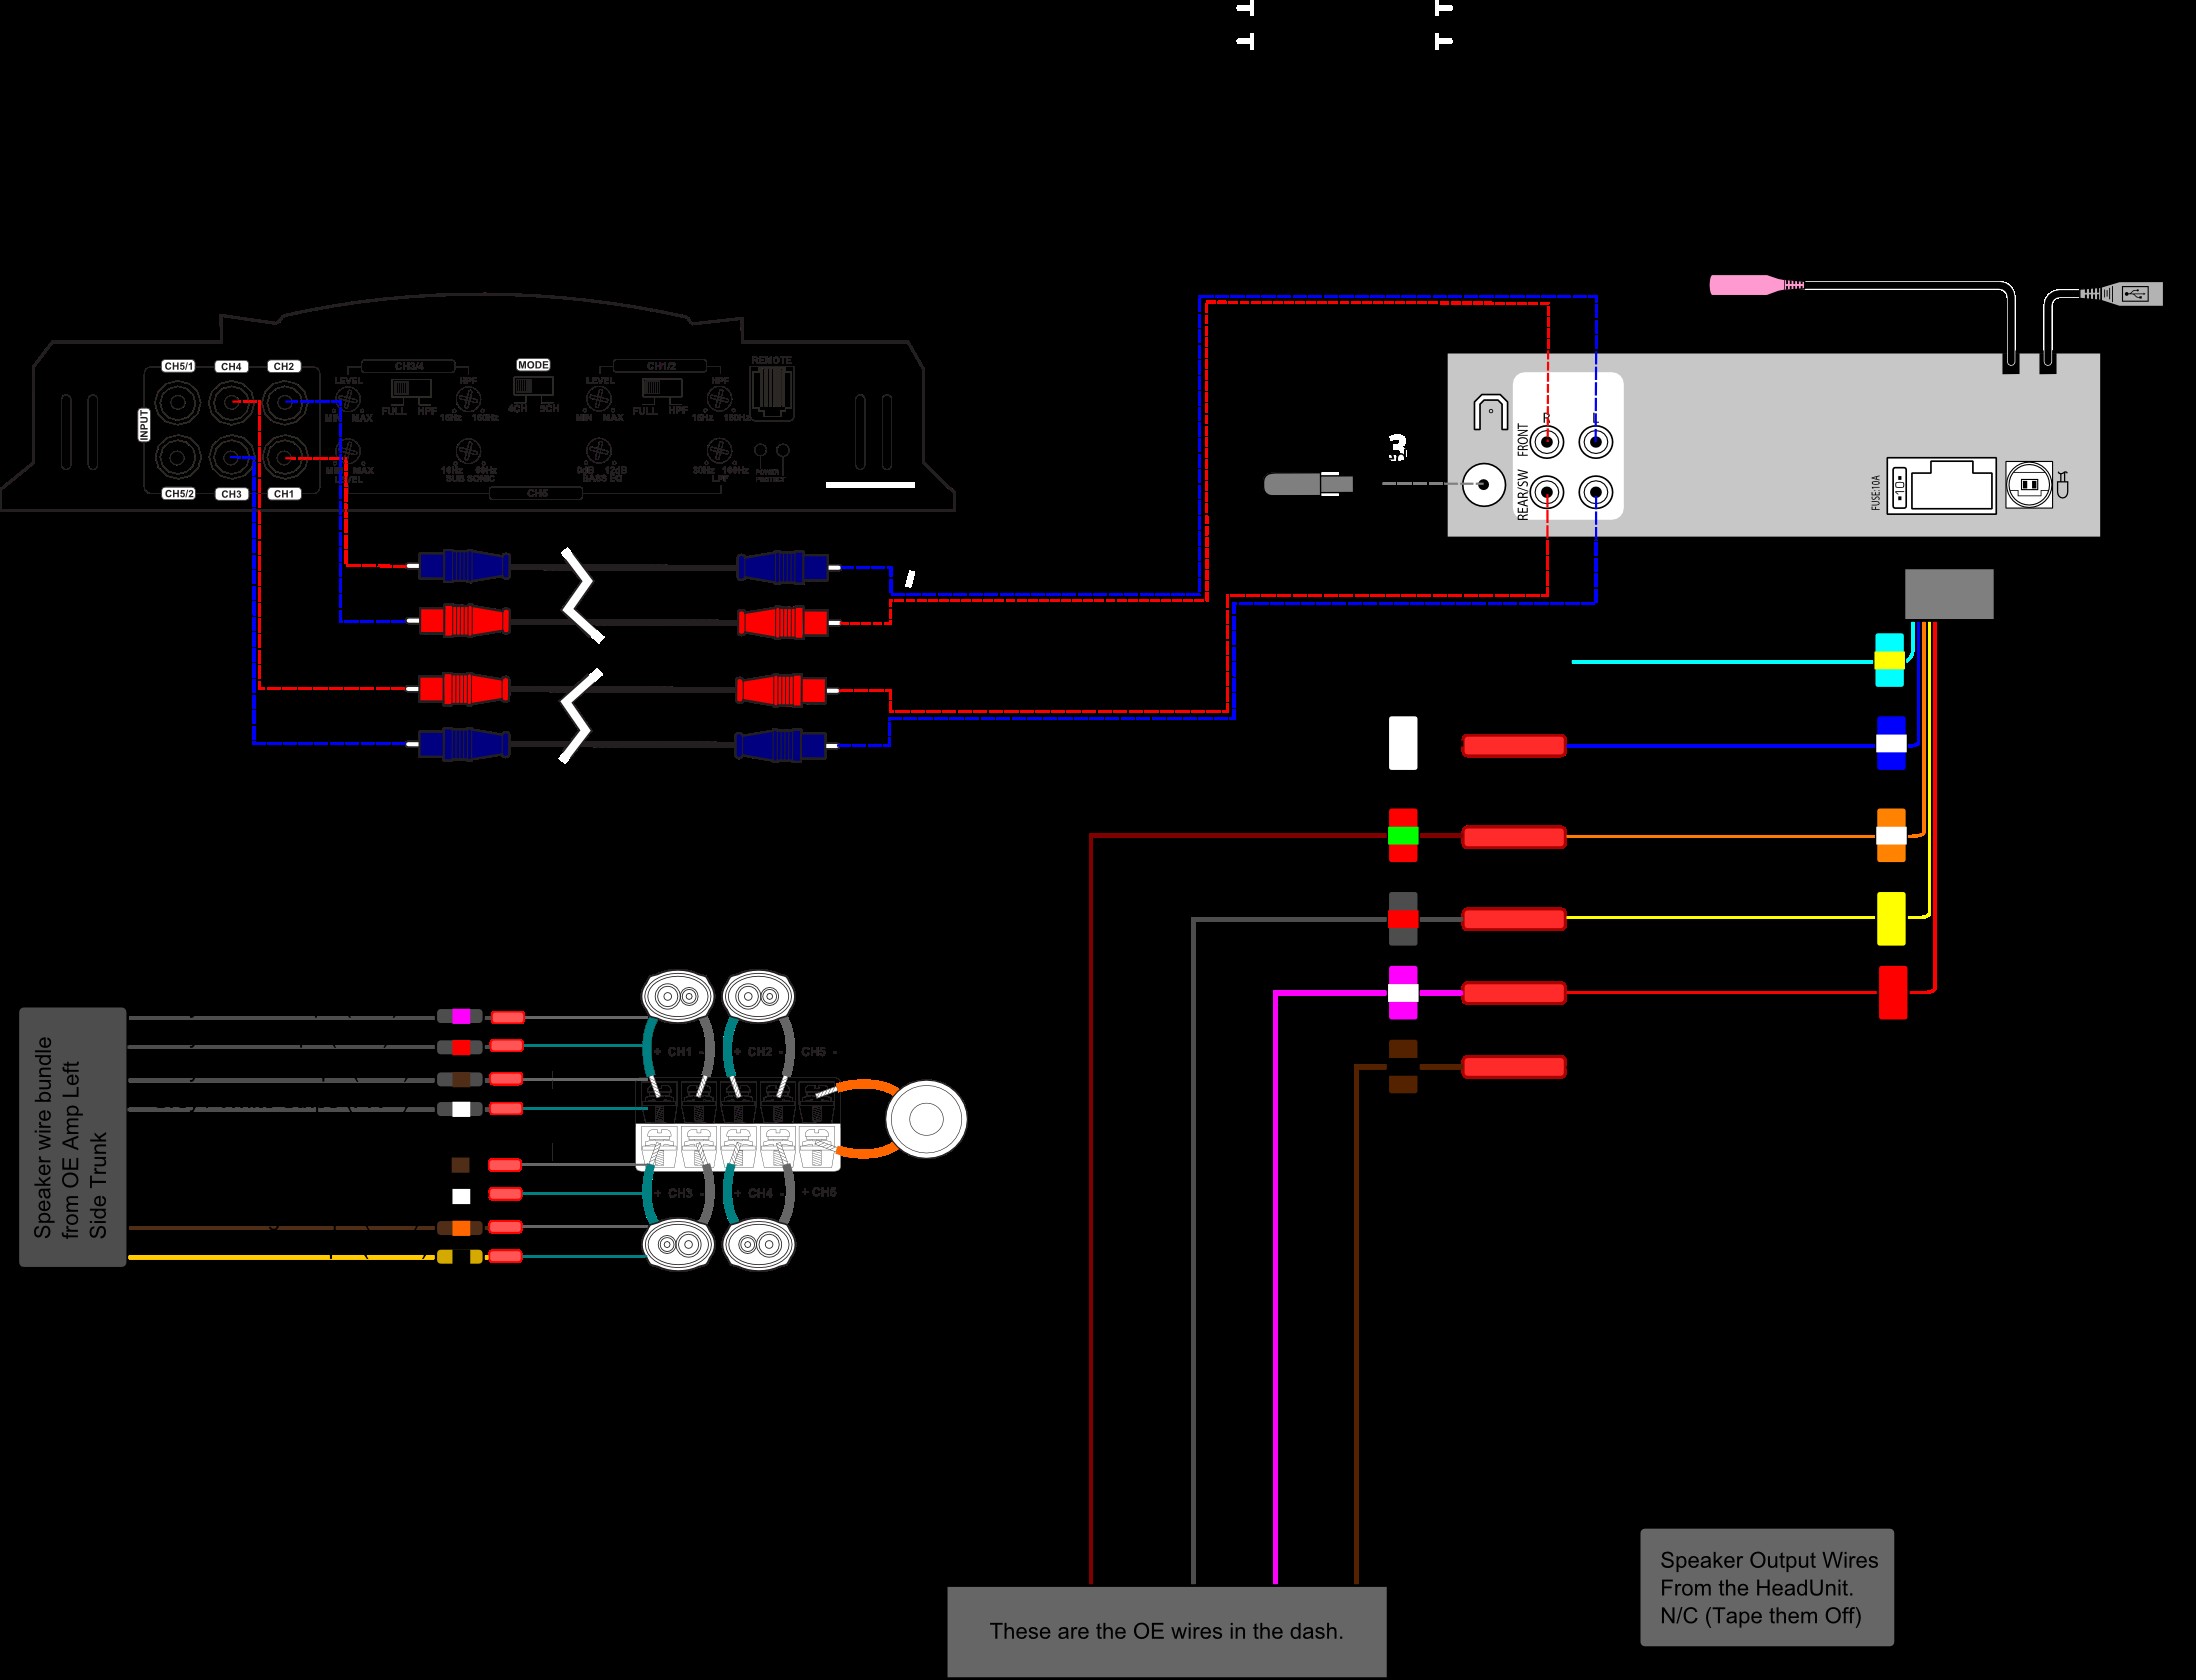 Wiring Diagram for Car Amplifier Car Audio Wiring Diagrams Jvc Stereo Diagram Color On within Auto